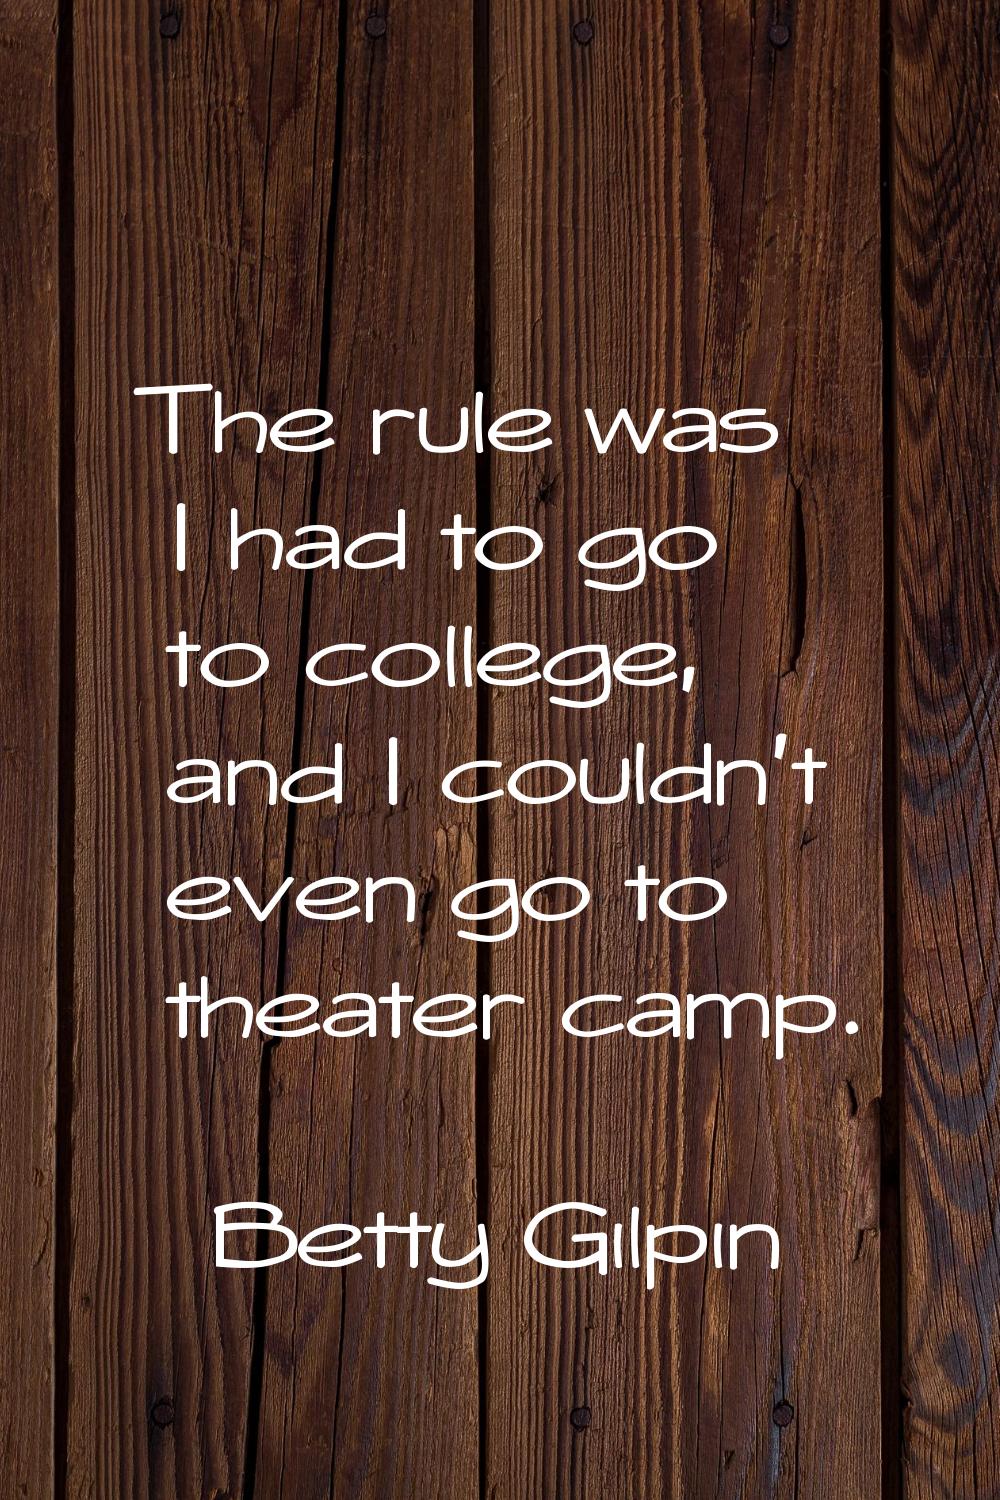 The rule was I had to go to college, and I couldn't even go to theater camp.